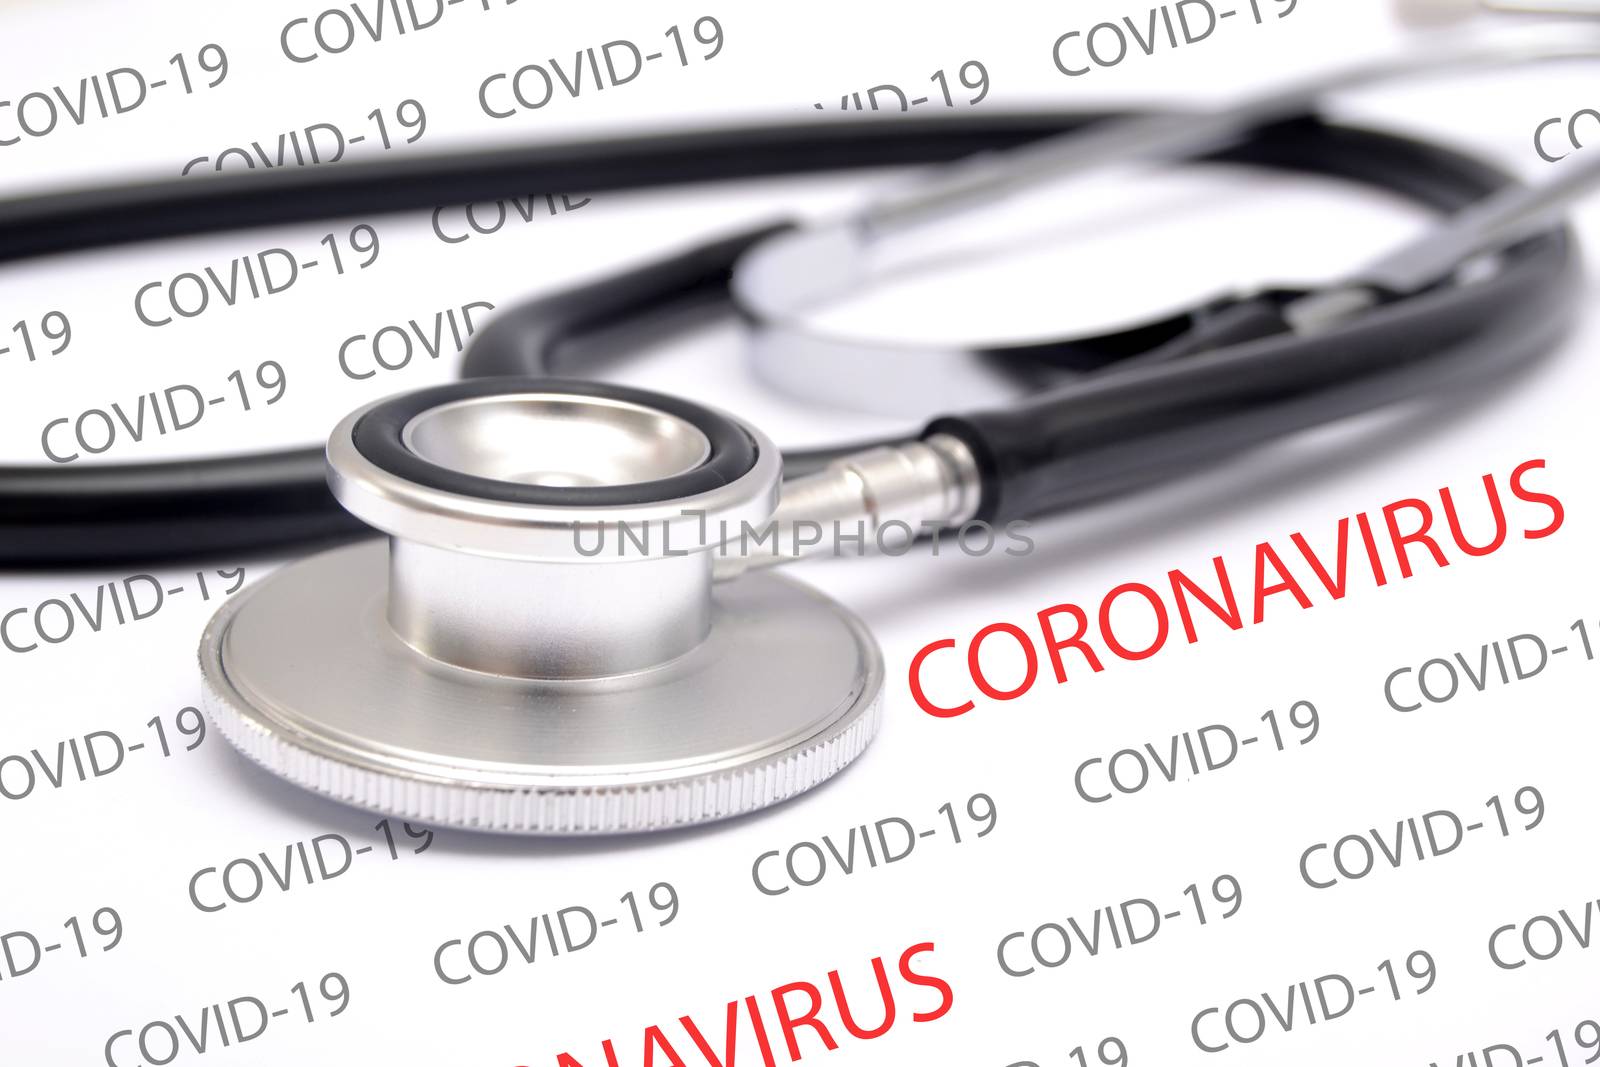 Stethoscope with Coronavirus and COVID-19 pattern words